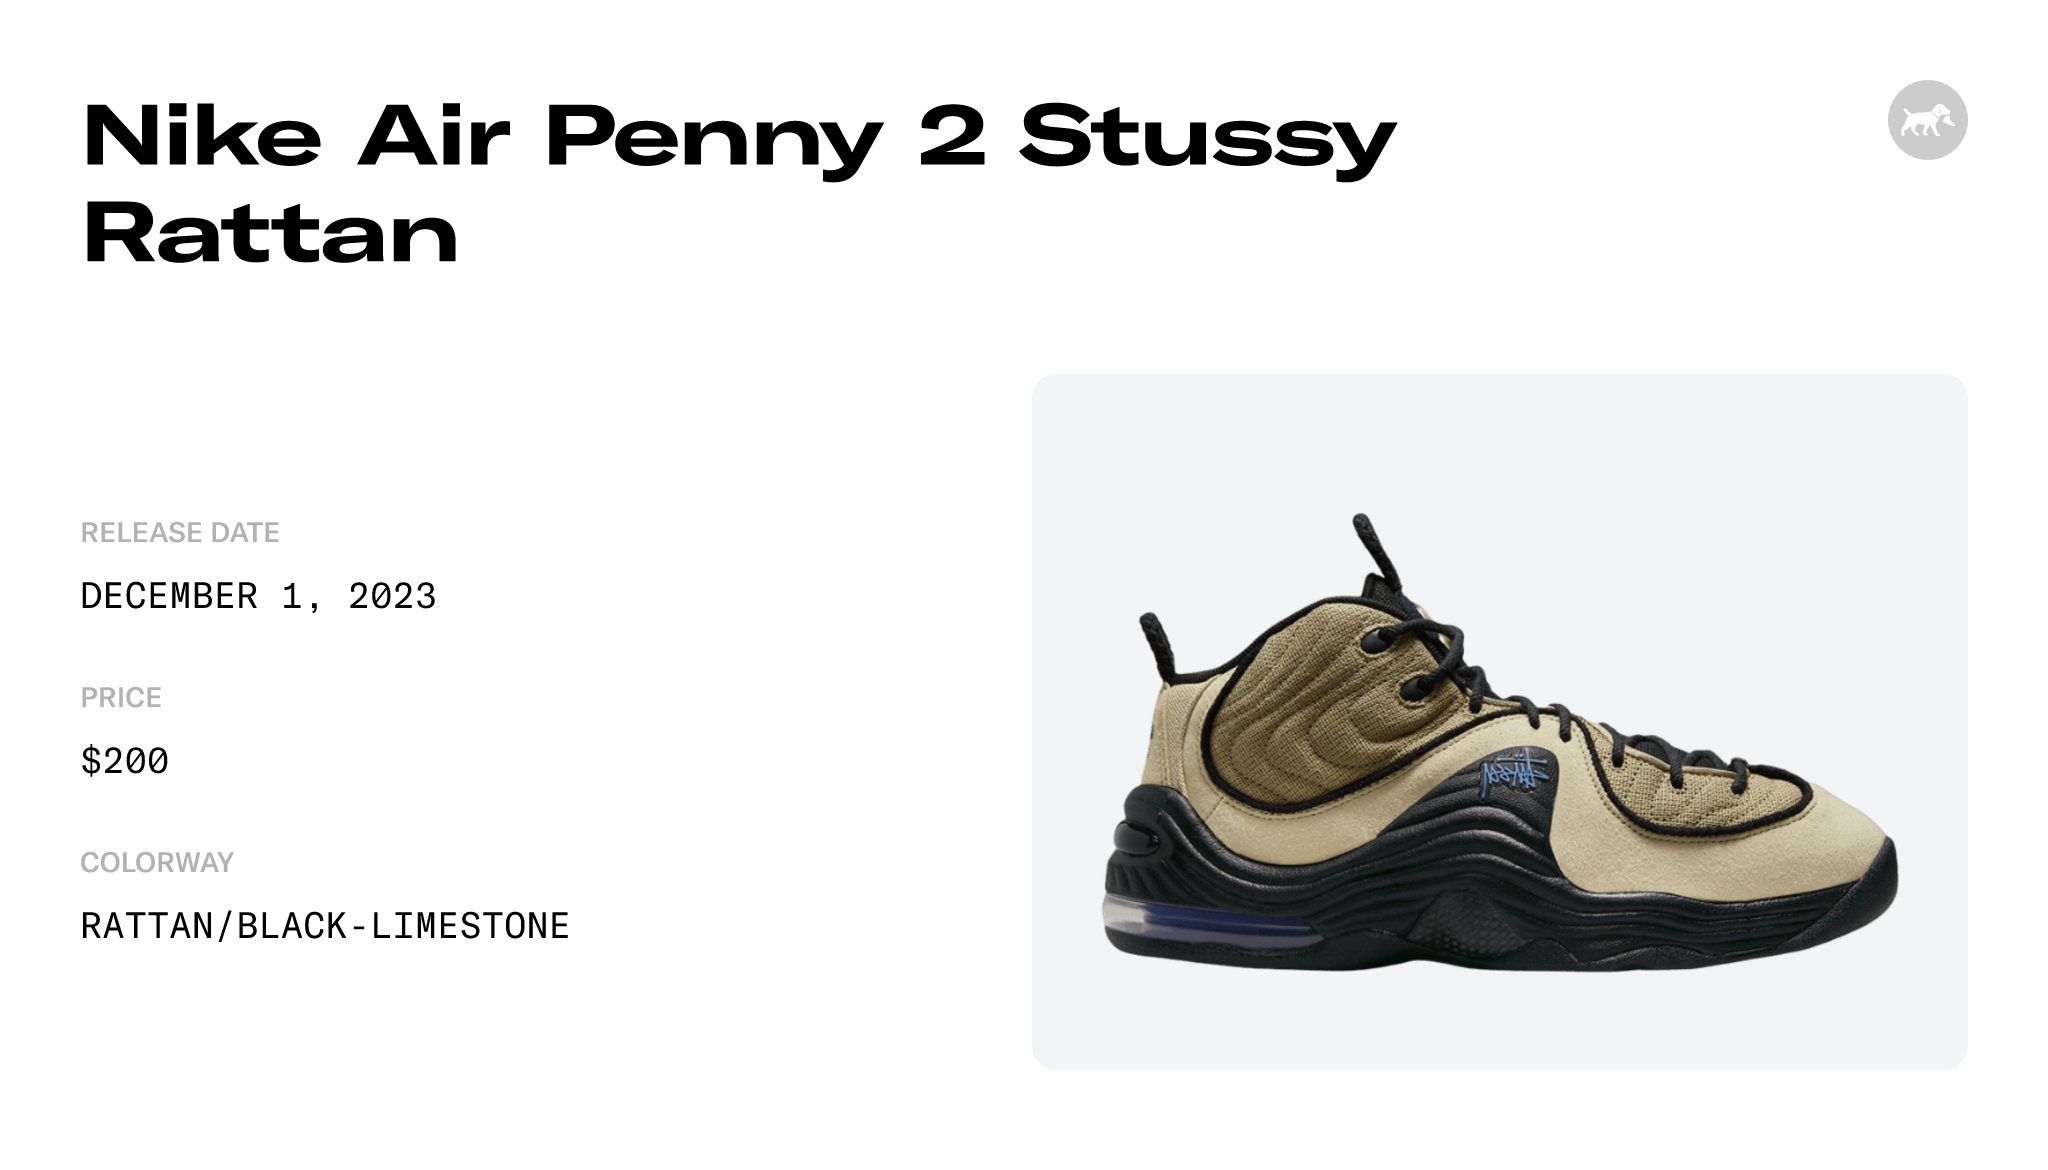 Nike Air Penny 2 Stussy Rattan - DX6934-200 Raffles and Release Date